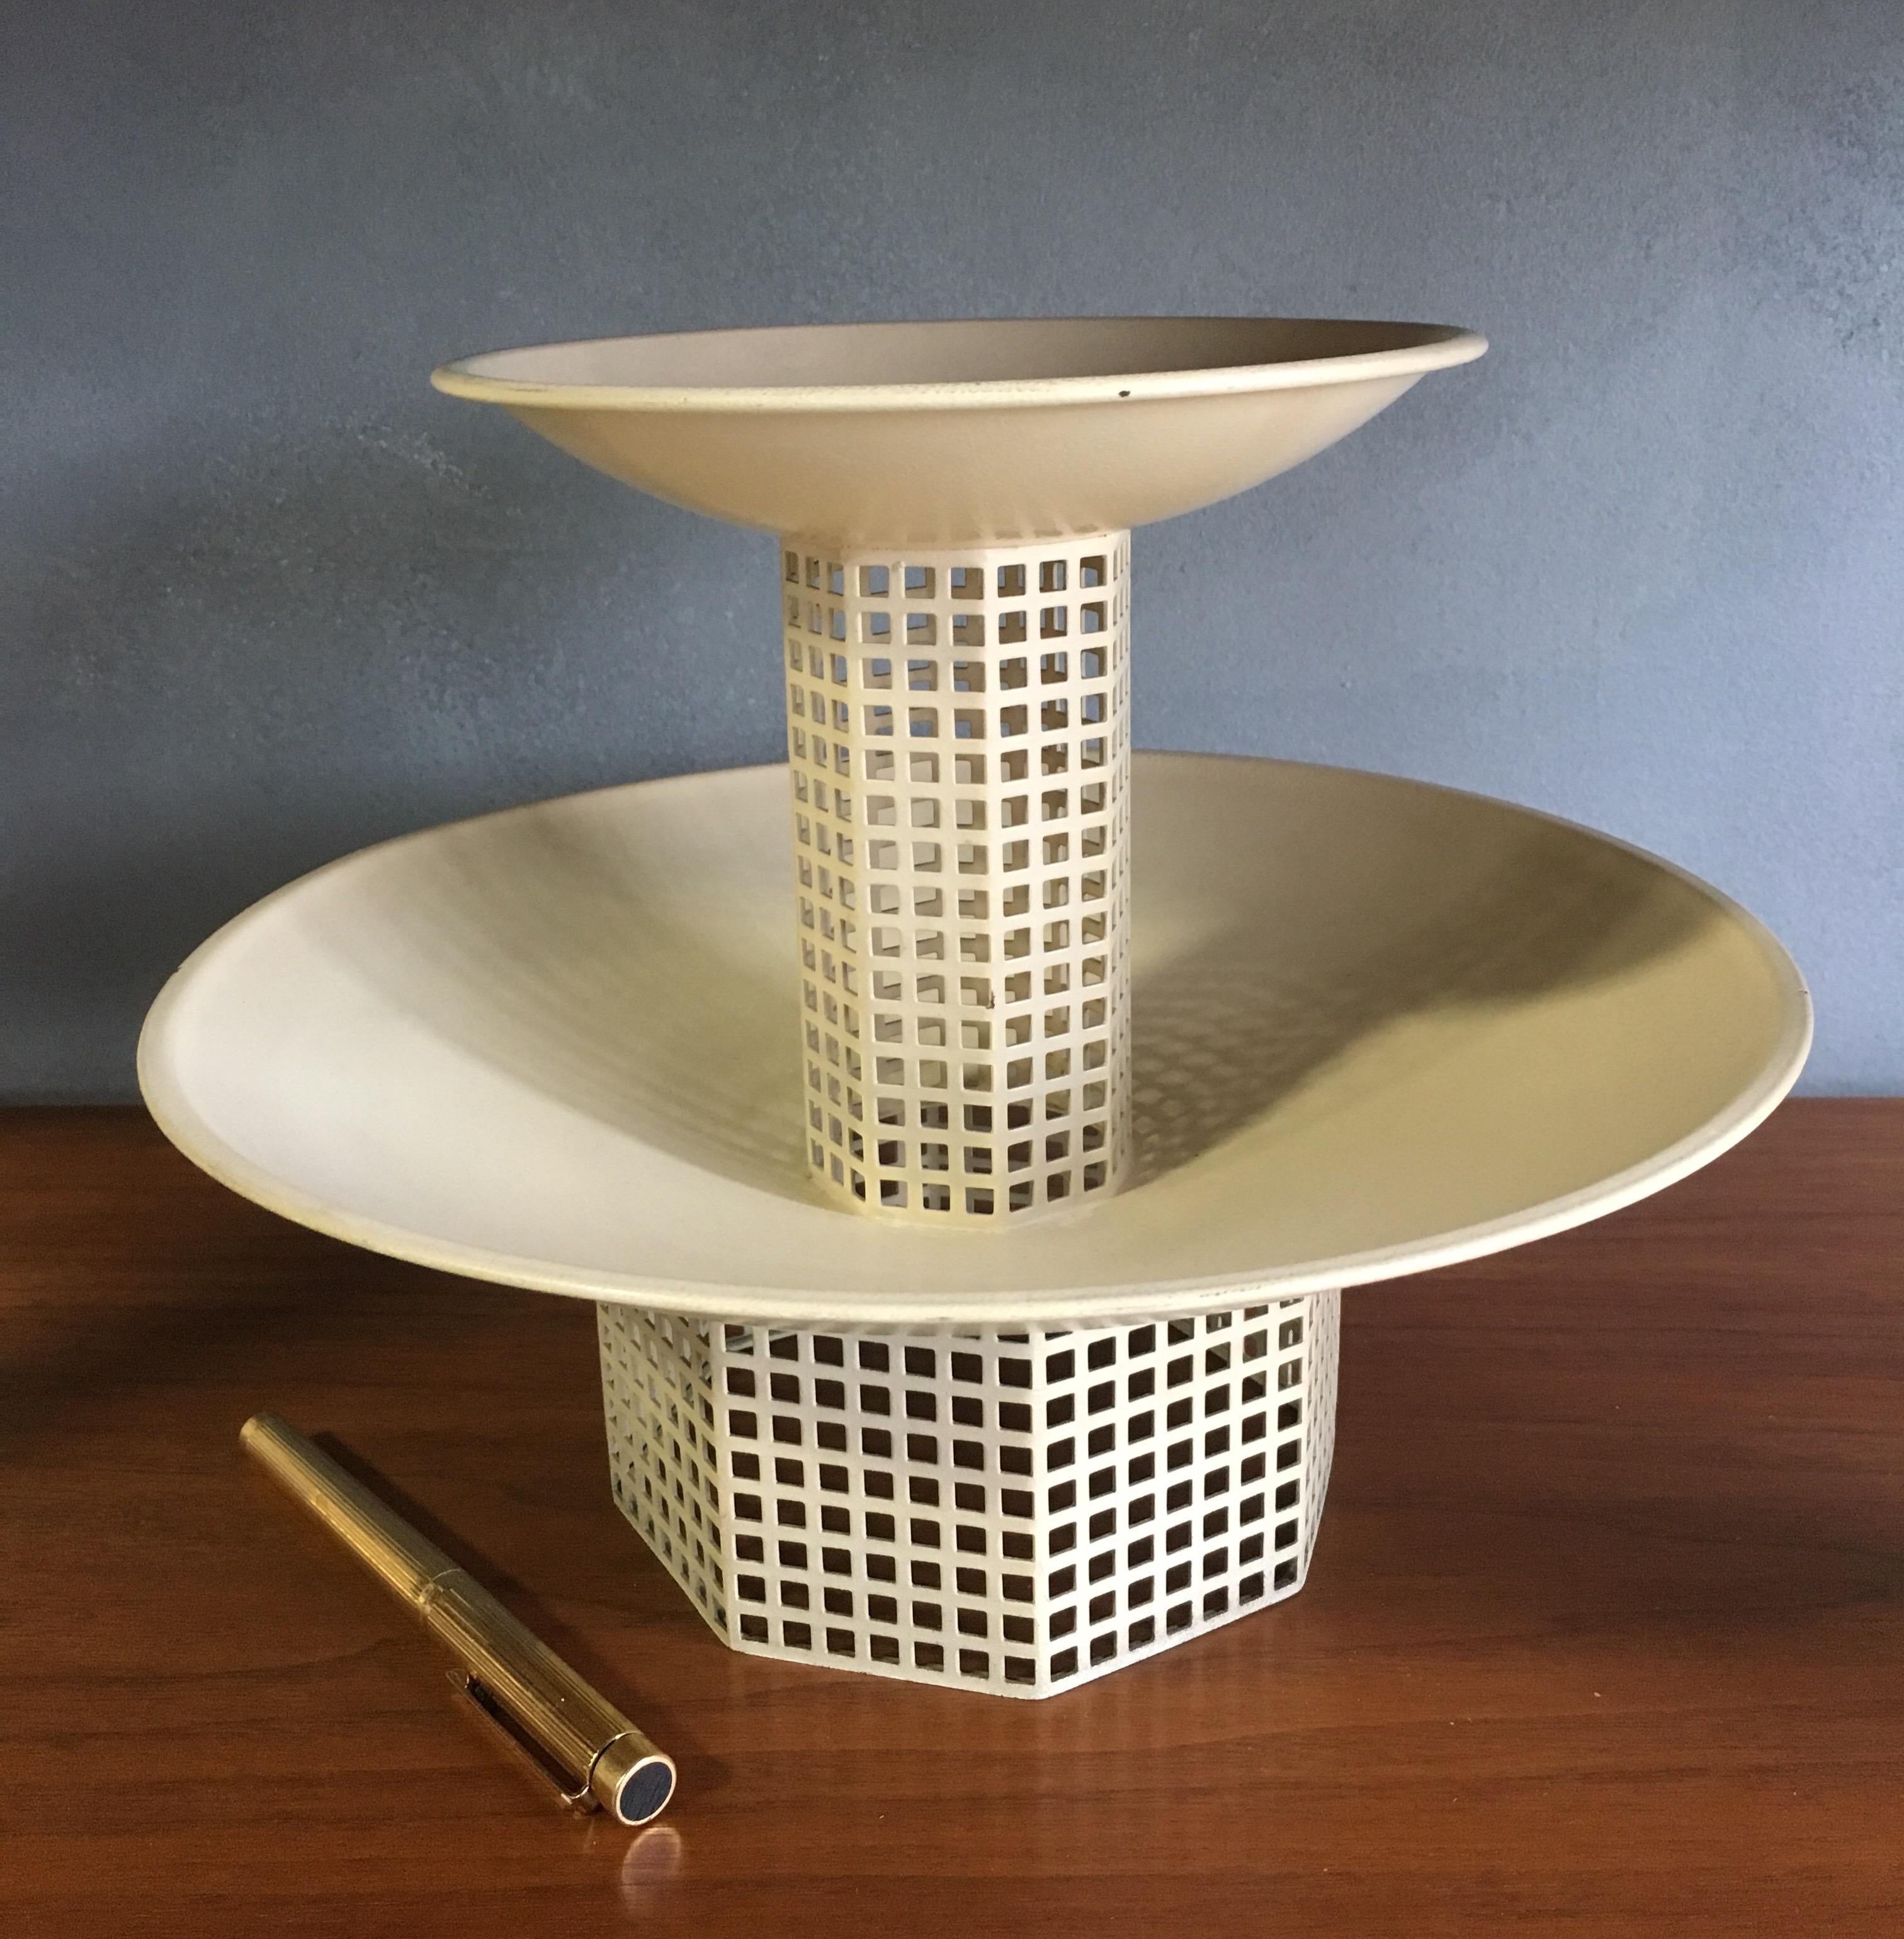 Elegant and strikingly minimal Bauhaus designs by Josef Hoffman. Stands at 8 1/4 inches high. The lower dish is 10 1/2 to inches wide the upper dish is 6 1/2 inches wide. Showing little if any use.